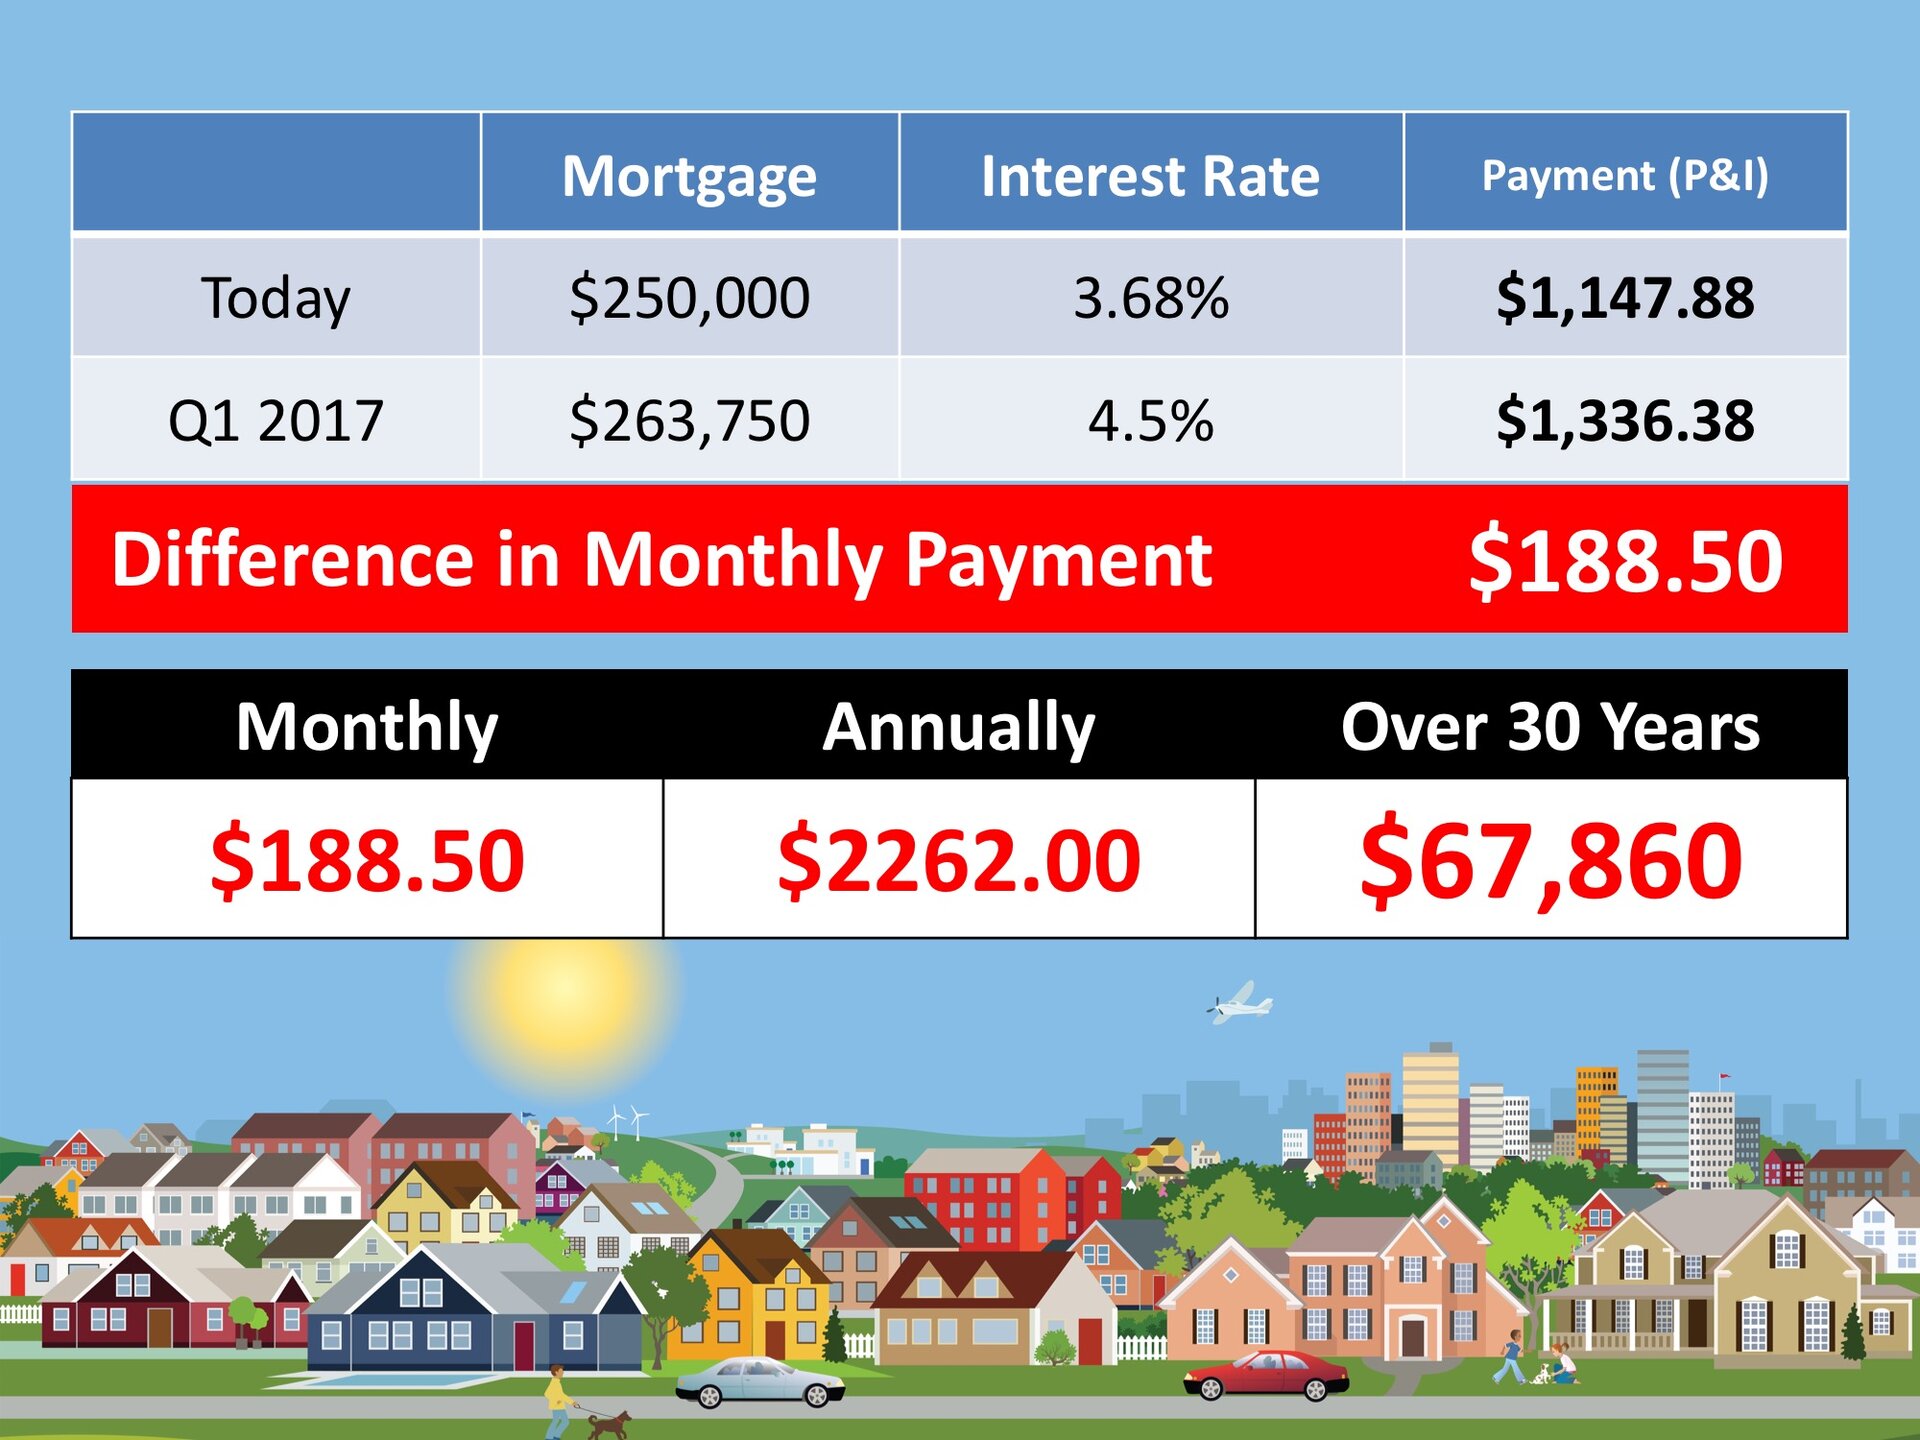 What If I Wait Until Next Year To Buy A Home? | Keeping Current Matters